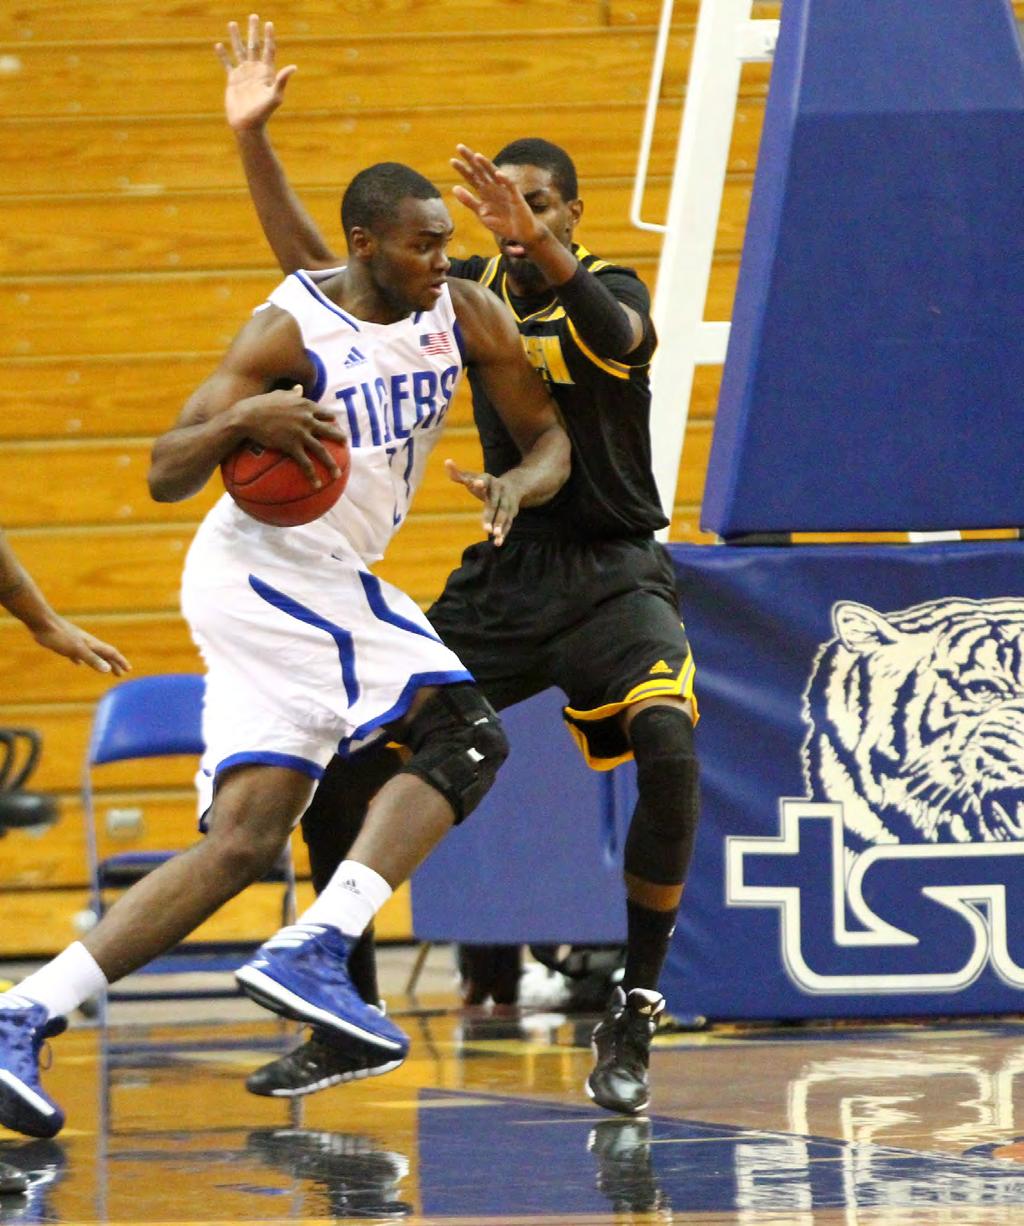 STUDENT-ATHLETES - AME-BY-AME Tennessee State Men's Basketball Tennessee State Individual ame-by-ame (as of Apr, ) All games # Mekowulu, Christian Opponent REINHARDT SOUTHERN ILLINOIS FISK at